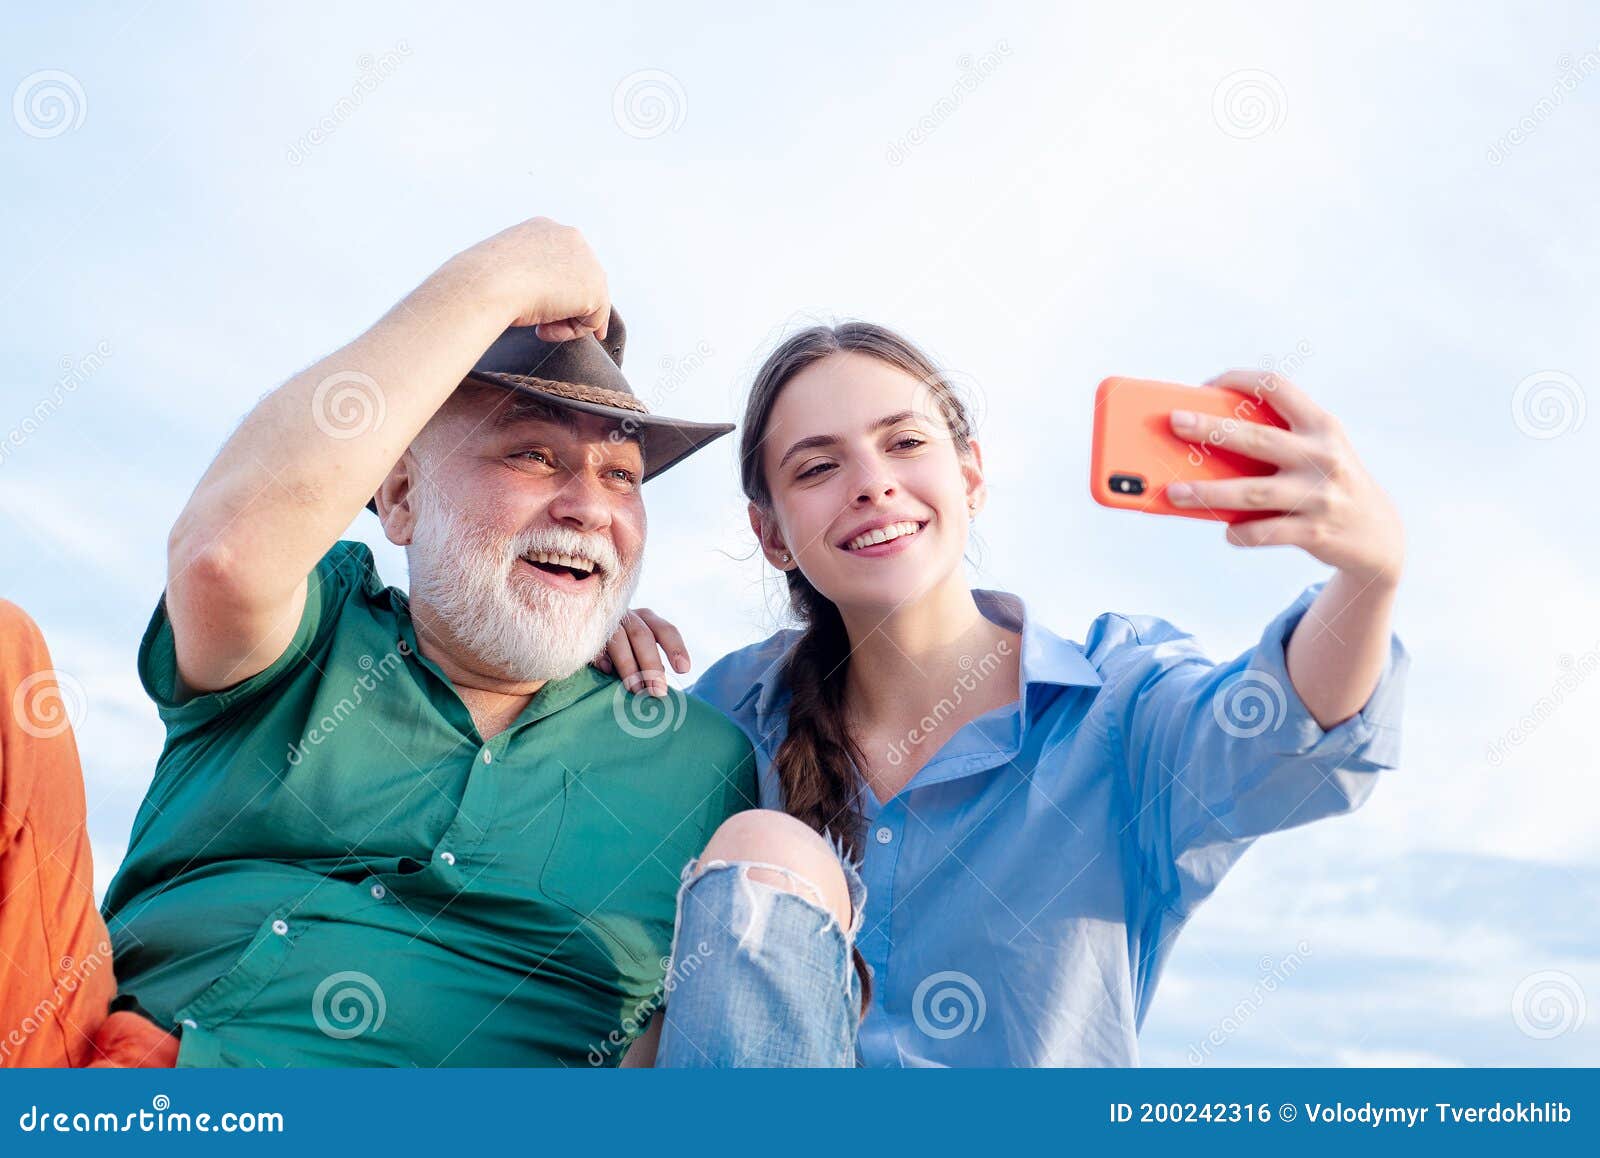 Old man and young girl pics